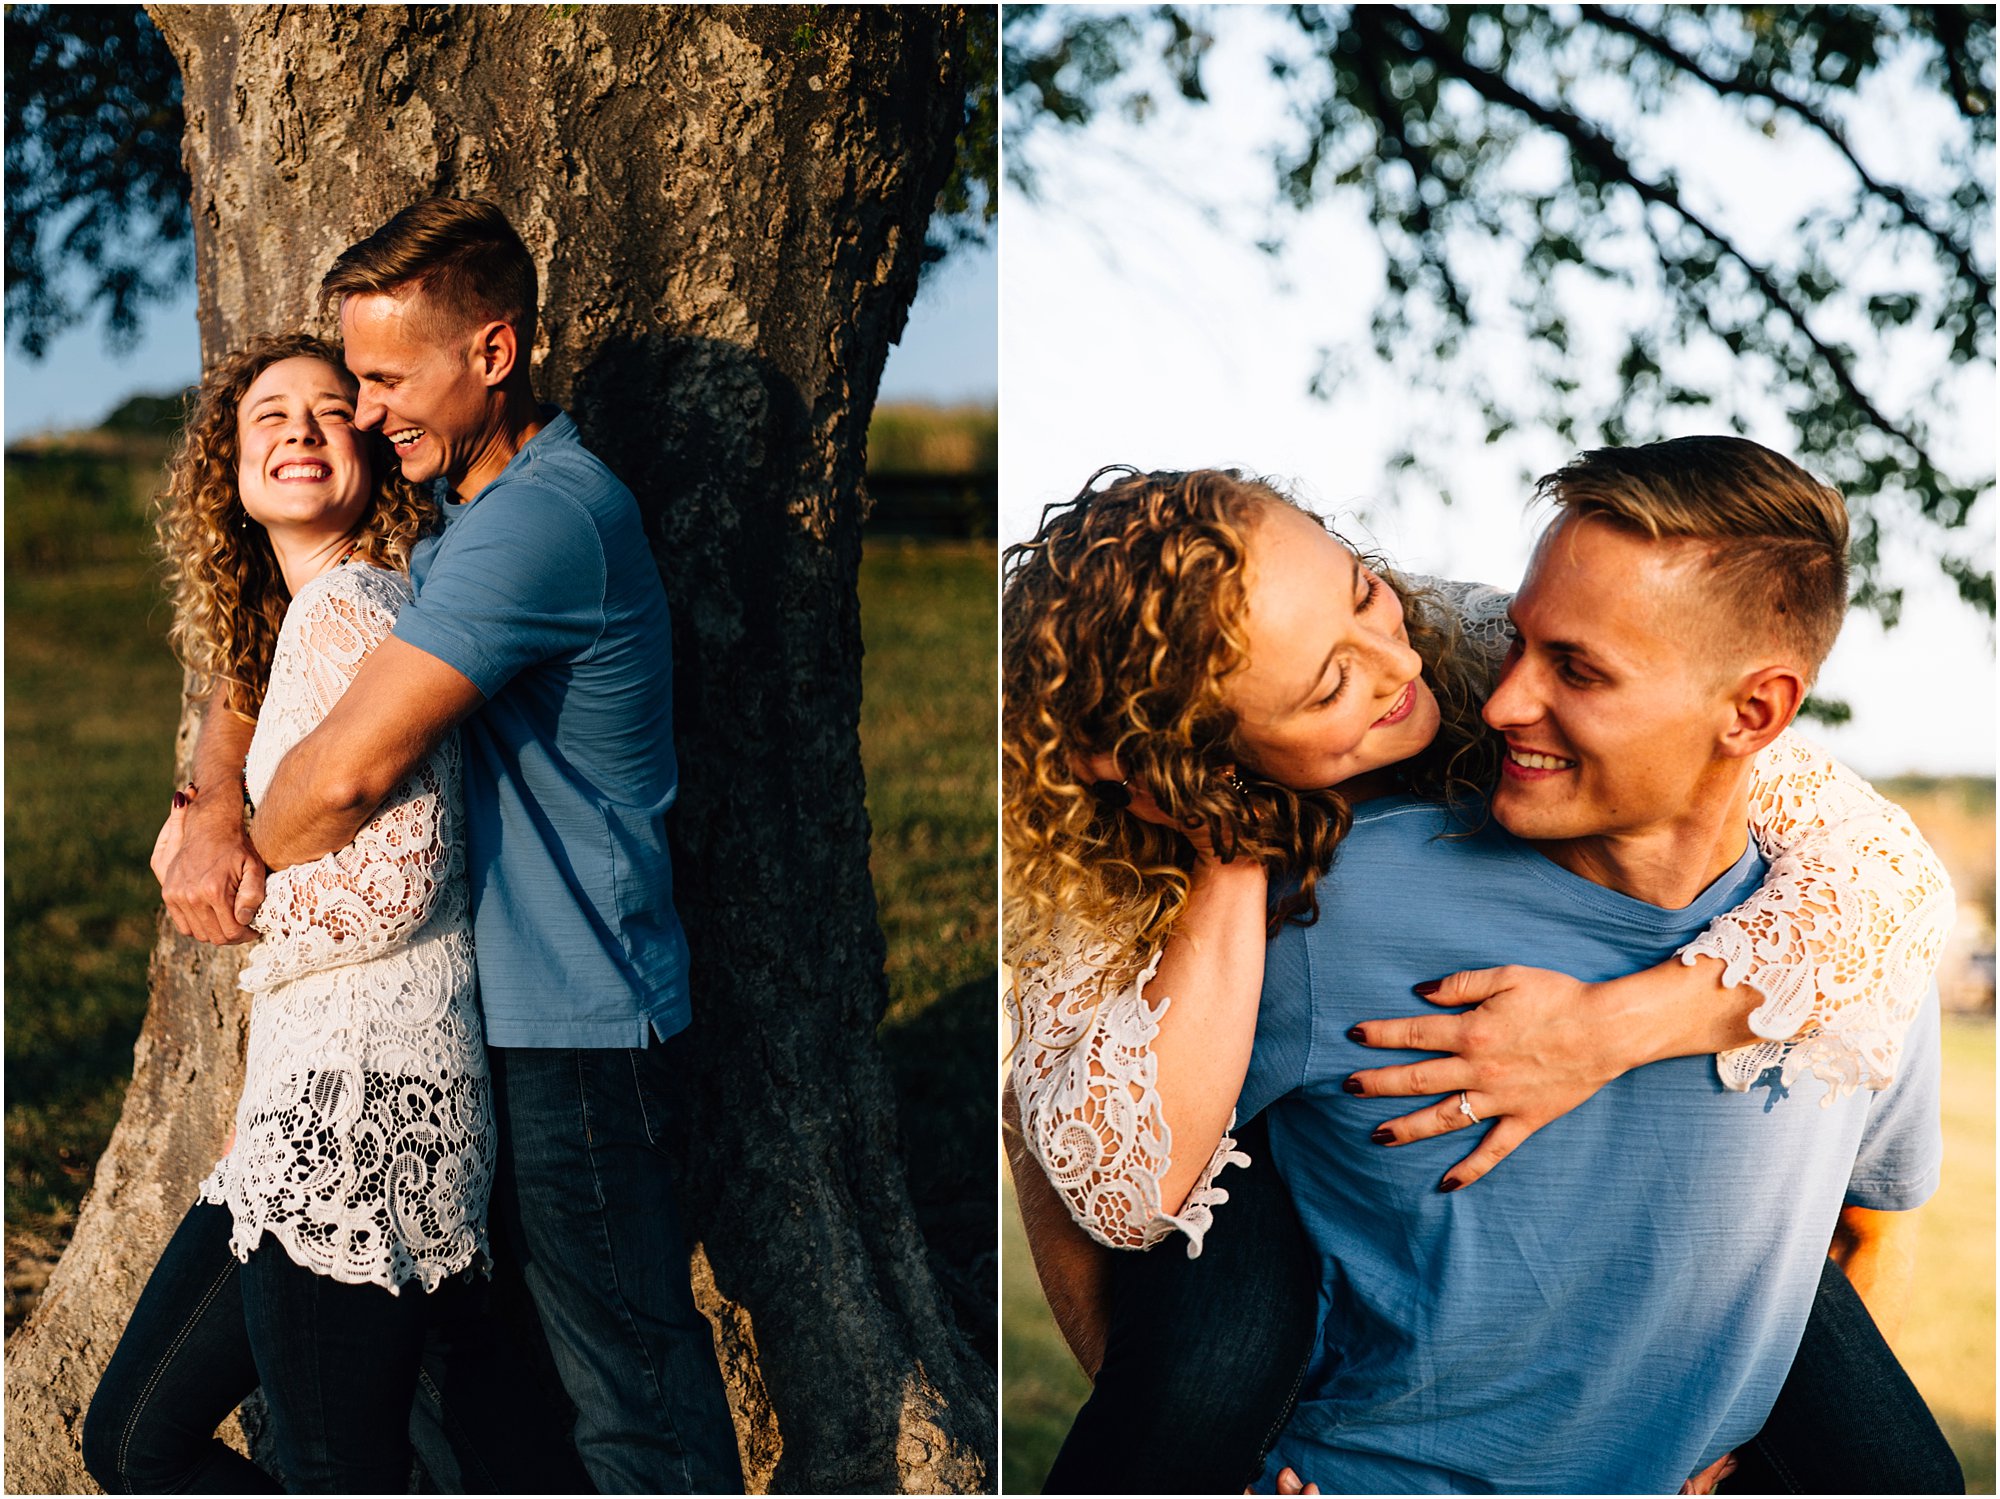 Guy giving girl piggy back riding while laughing during engagement session